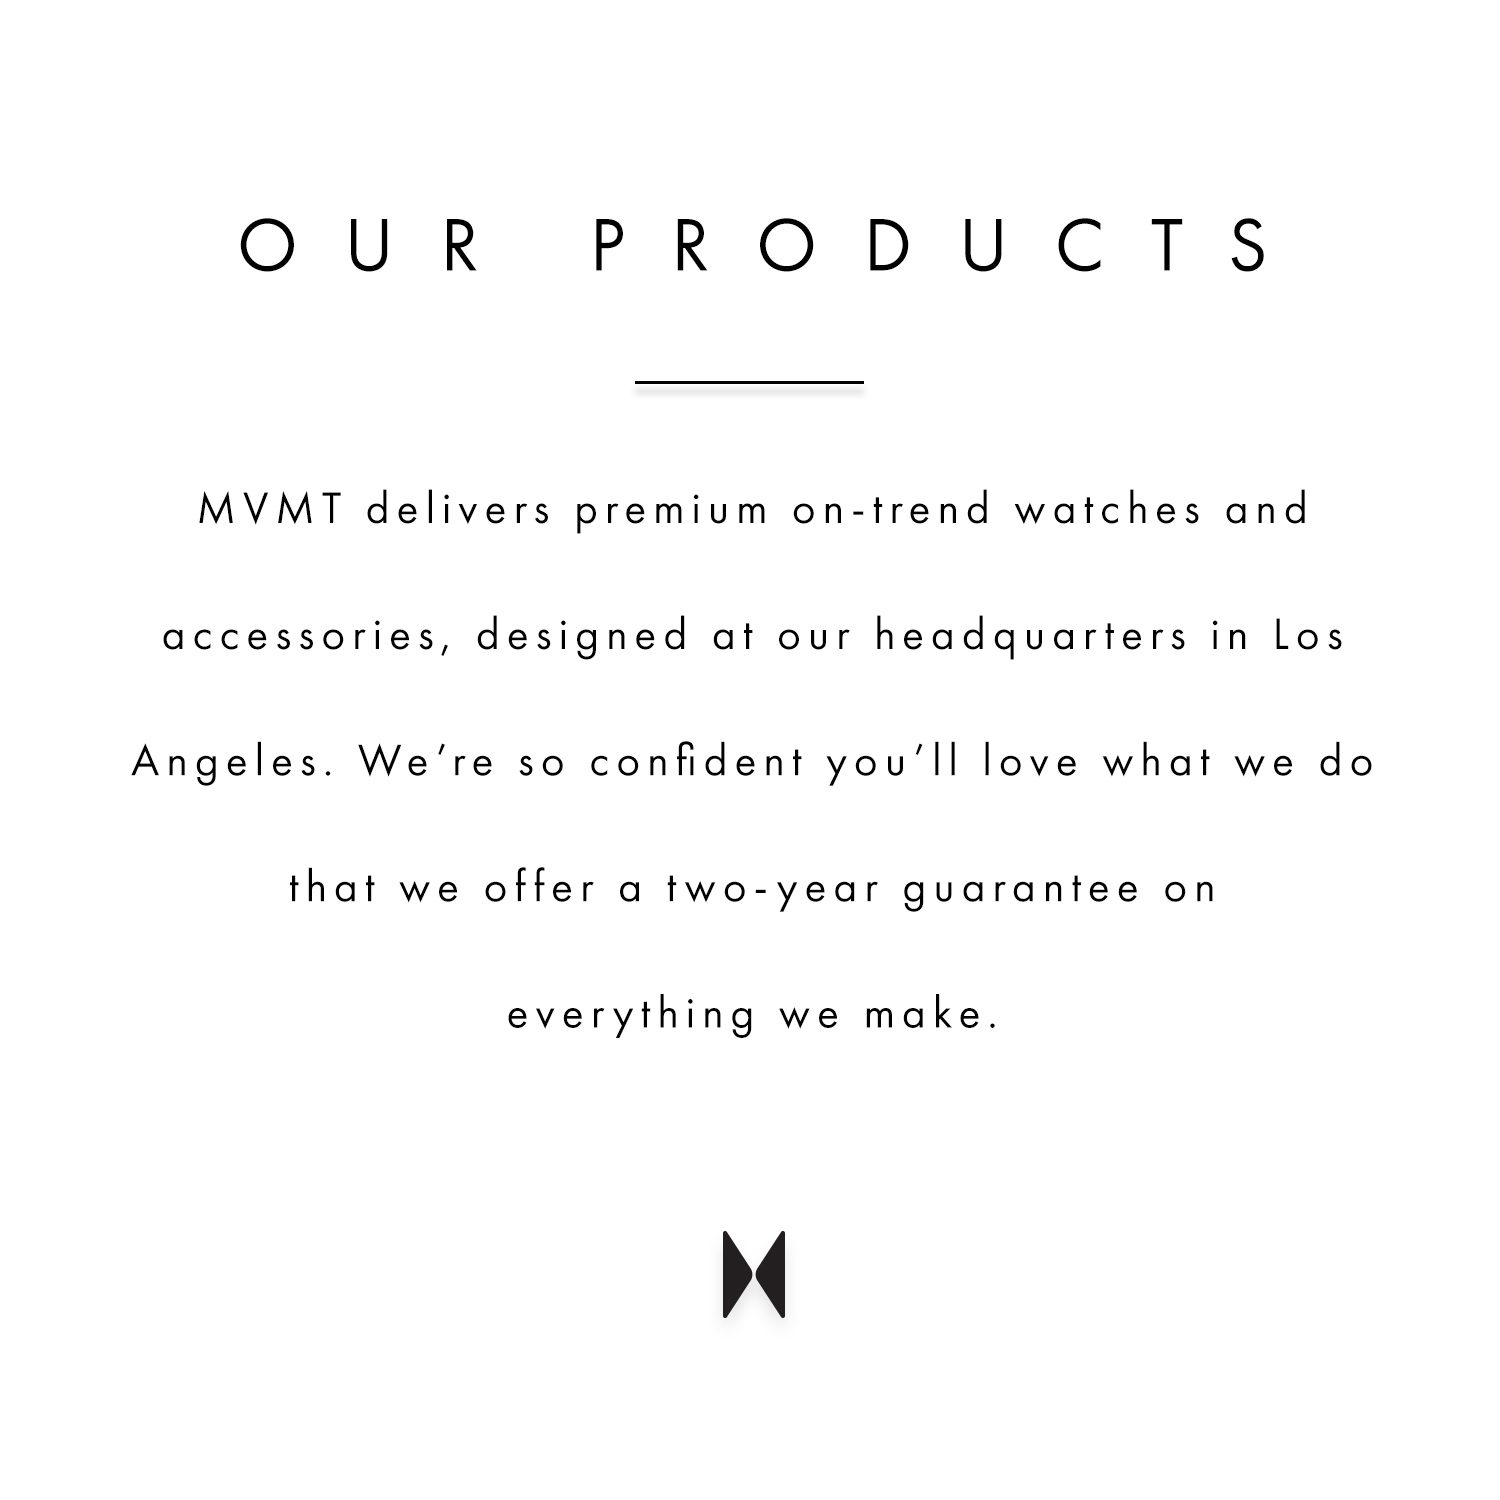 Our products. MVMT deslivers premium on-trend watches and accessories, designed at our headquarters in Los Angeles. We're so confident you'll love what we do that we offer a two-year guarantee on everything we make.